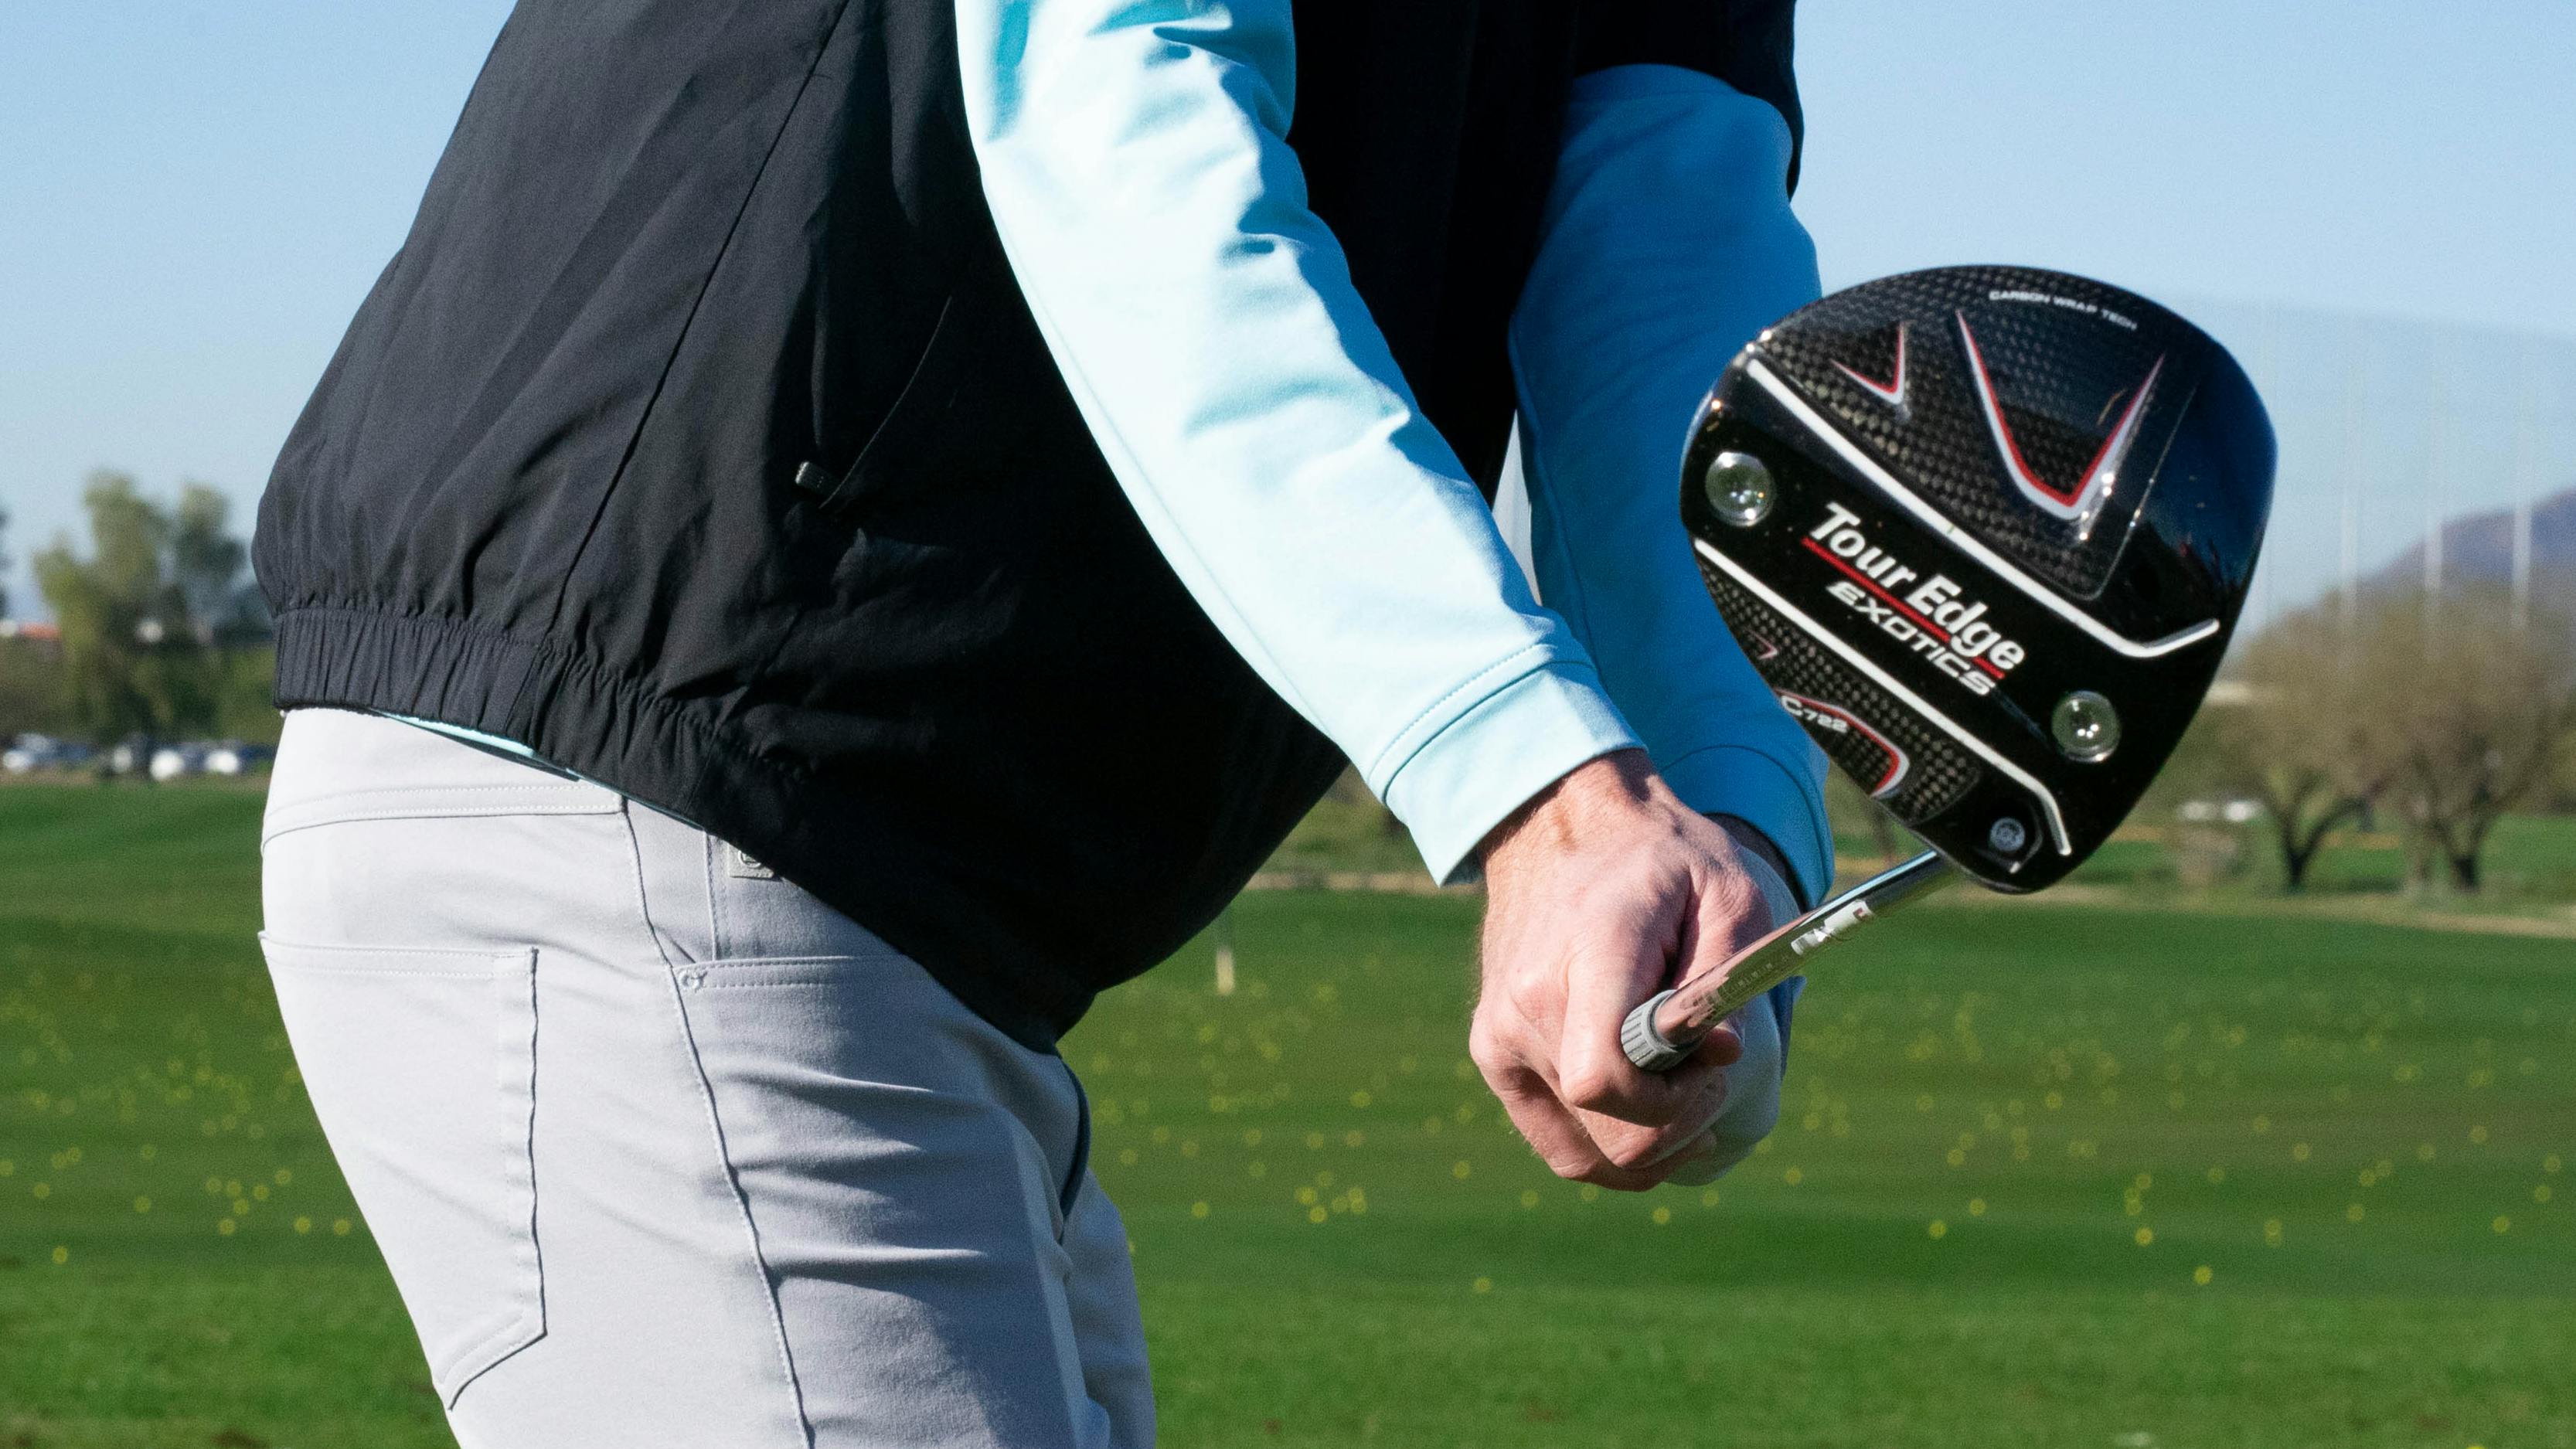 Person mid-backswing with a driver